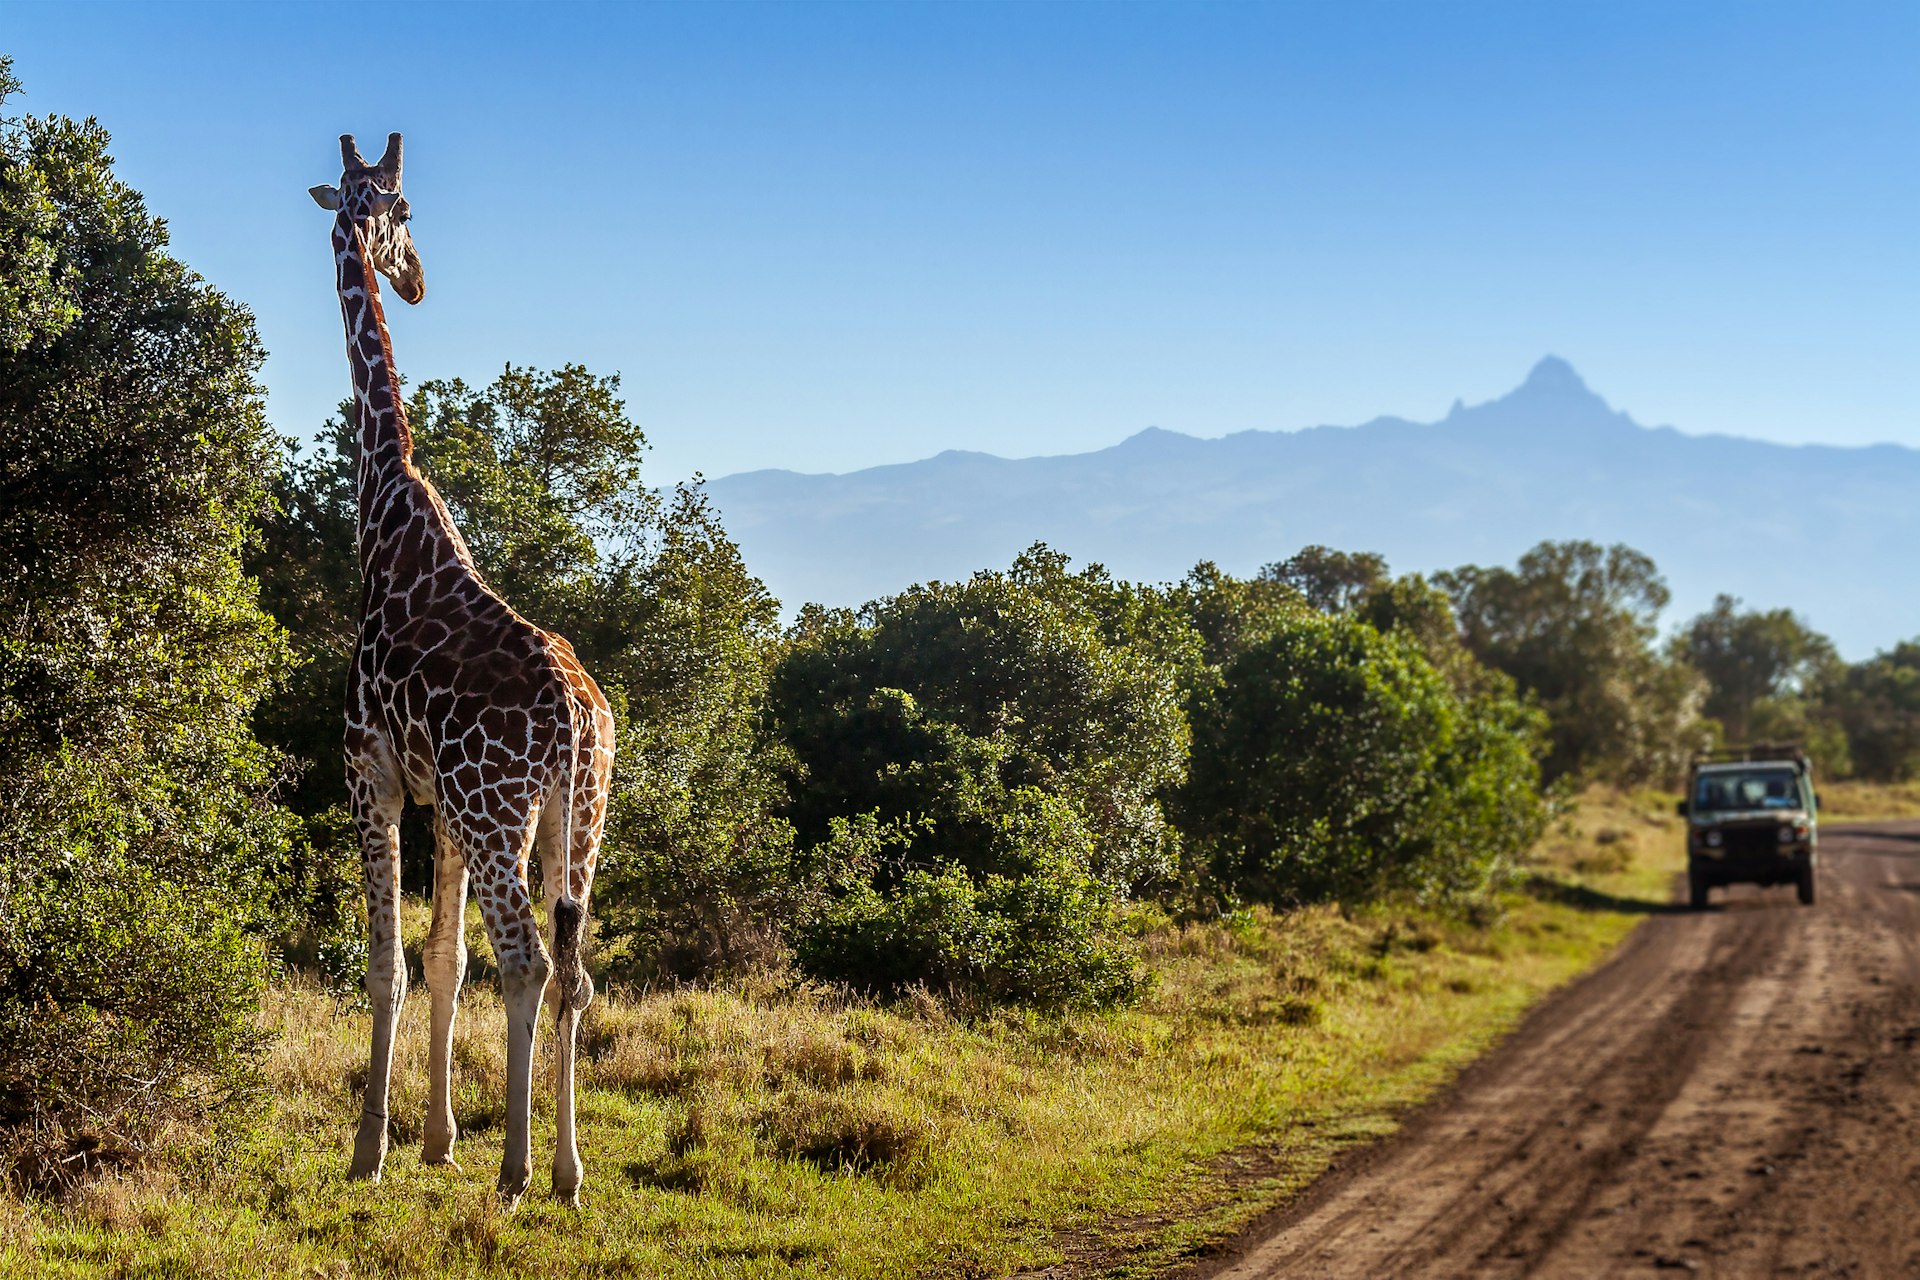 A 4WD follows a dirt road through a national park as a giraffe looks on from the side of the track